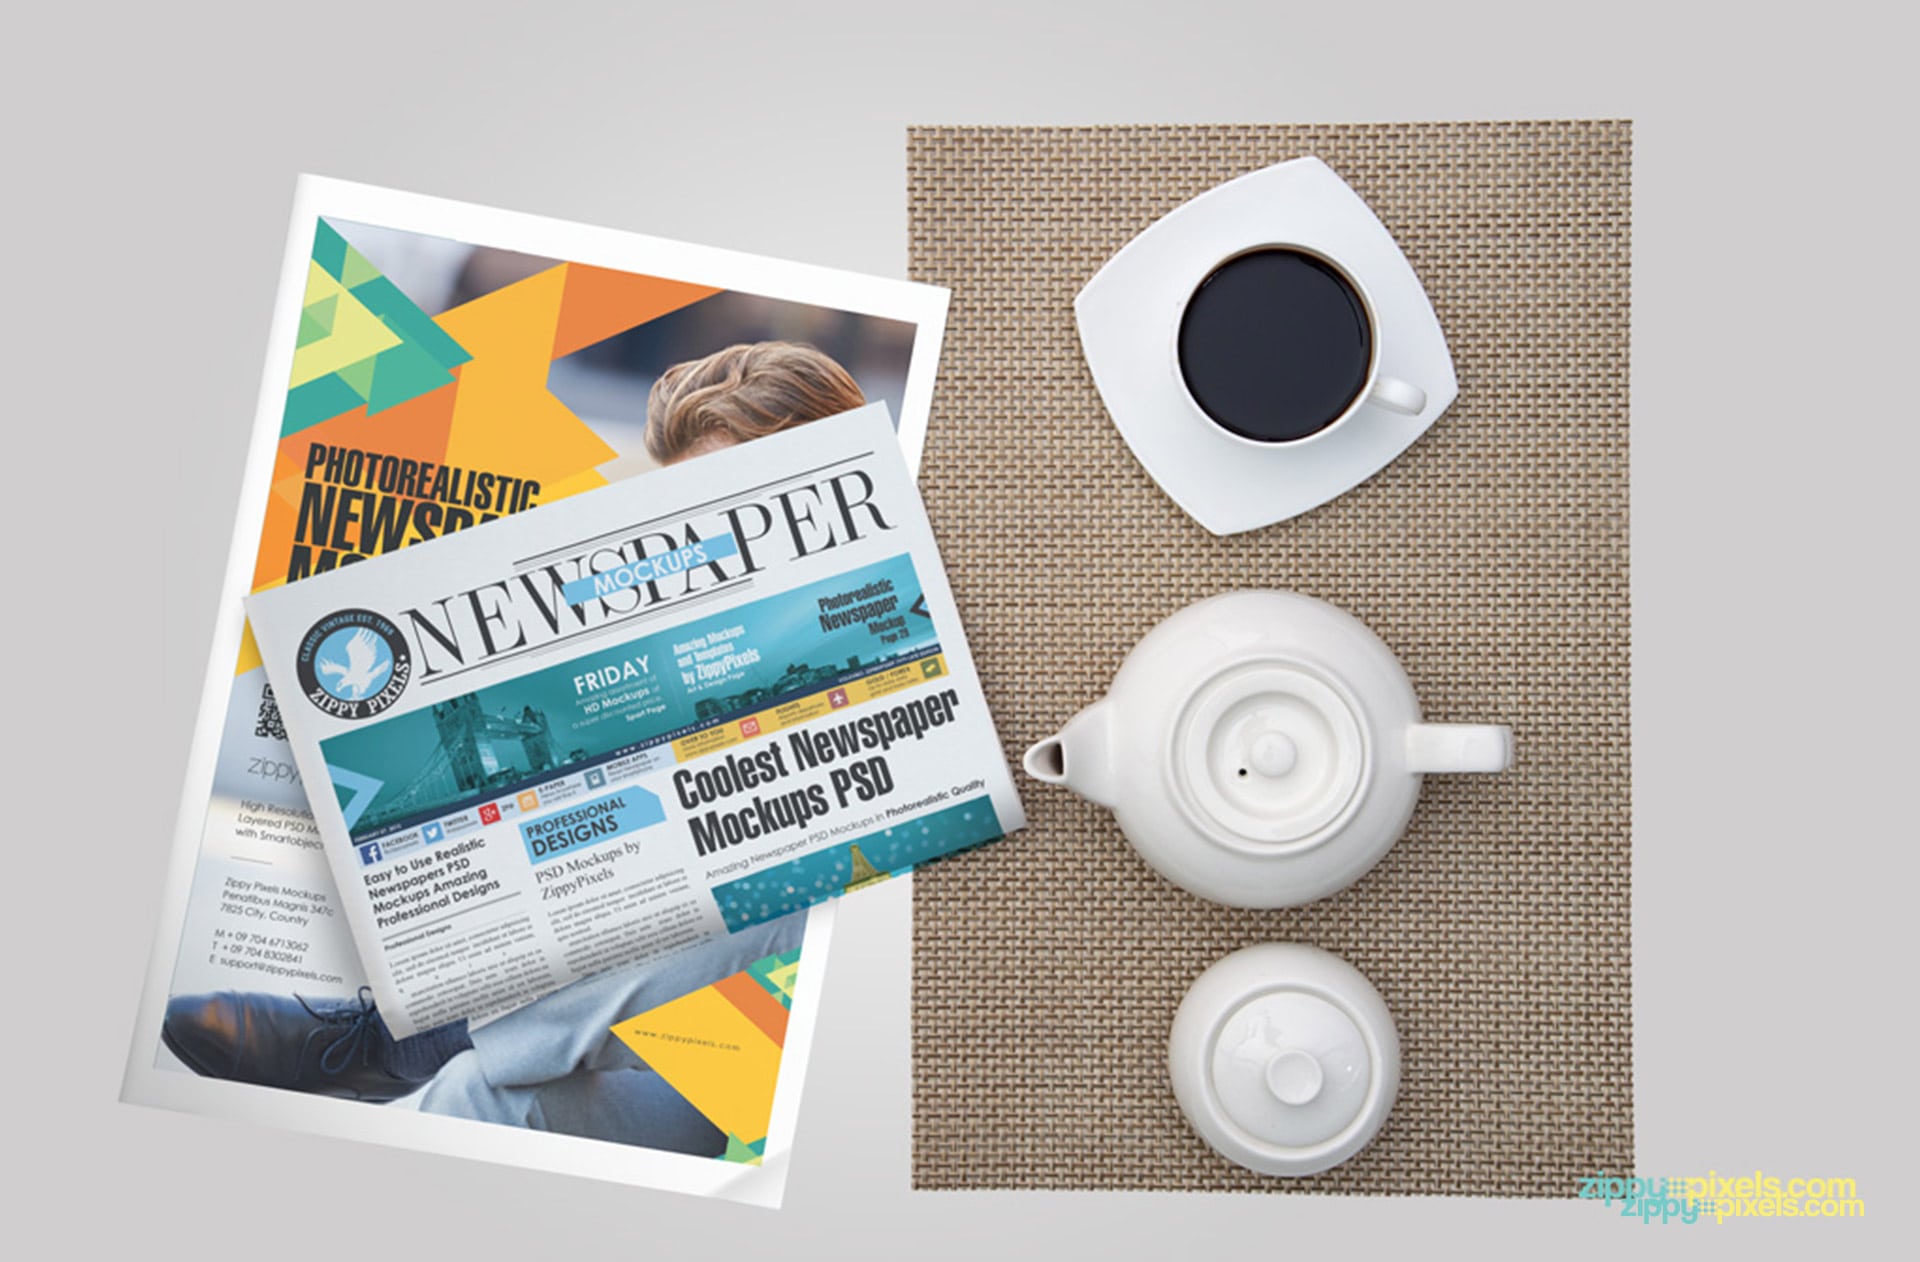 photorealistic newspaper advertising mockup with tea party theme